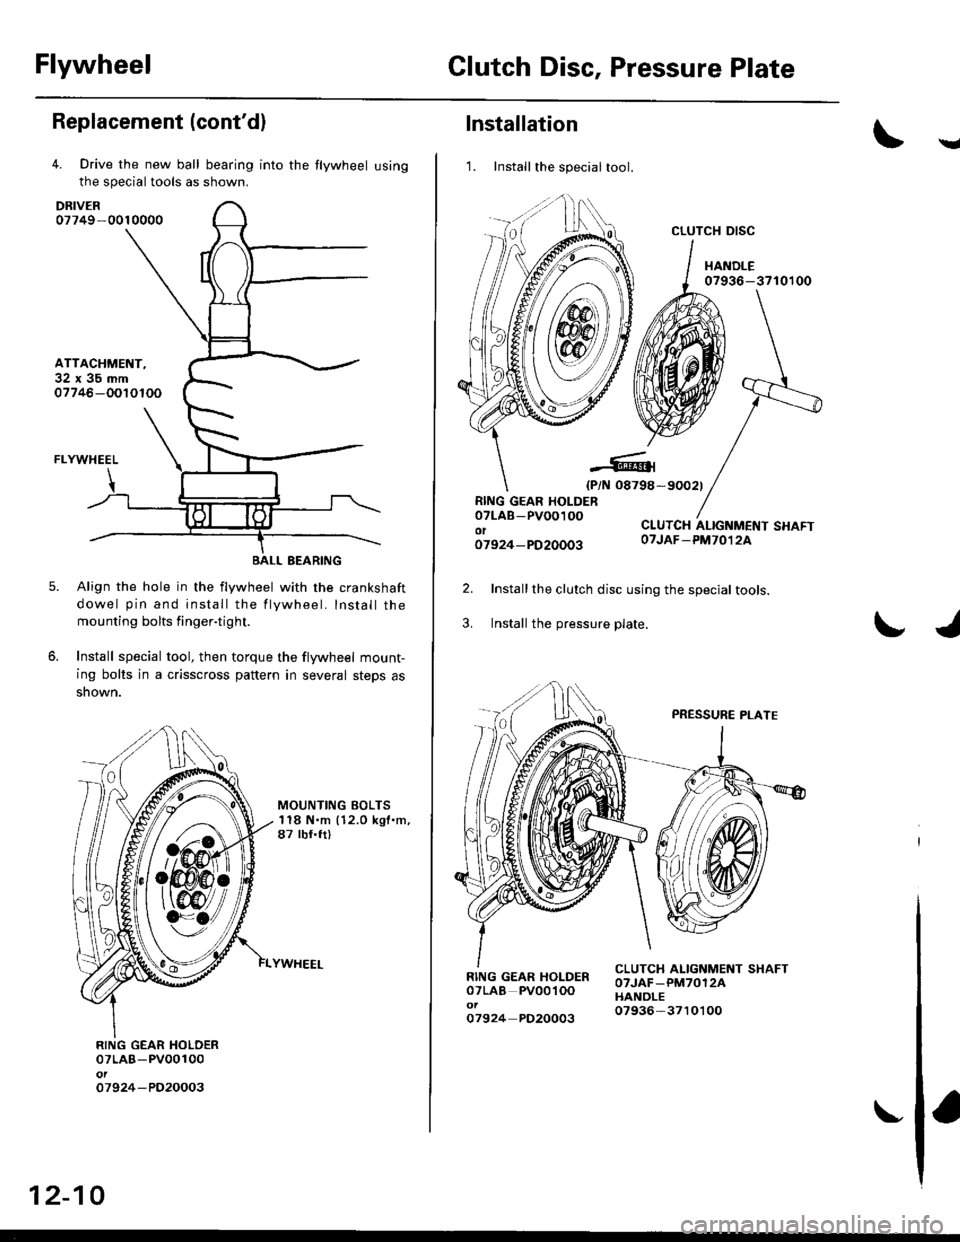 HONDA CIVIC 1997 6.G Owners Manual FlywheelClutch Disc, Pressure Plate
Replacement (contdl
4. Drive the new ball bearing into the flywheel using
the special tools as shown.
DRIVER07749-0010000
ATTACHMENT,32x35mm07746-OOIOTOO
FLYWHEEL
